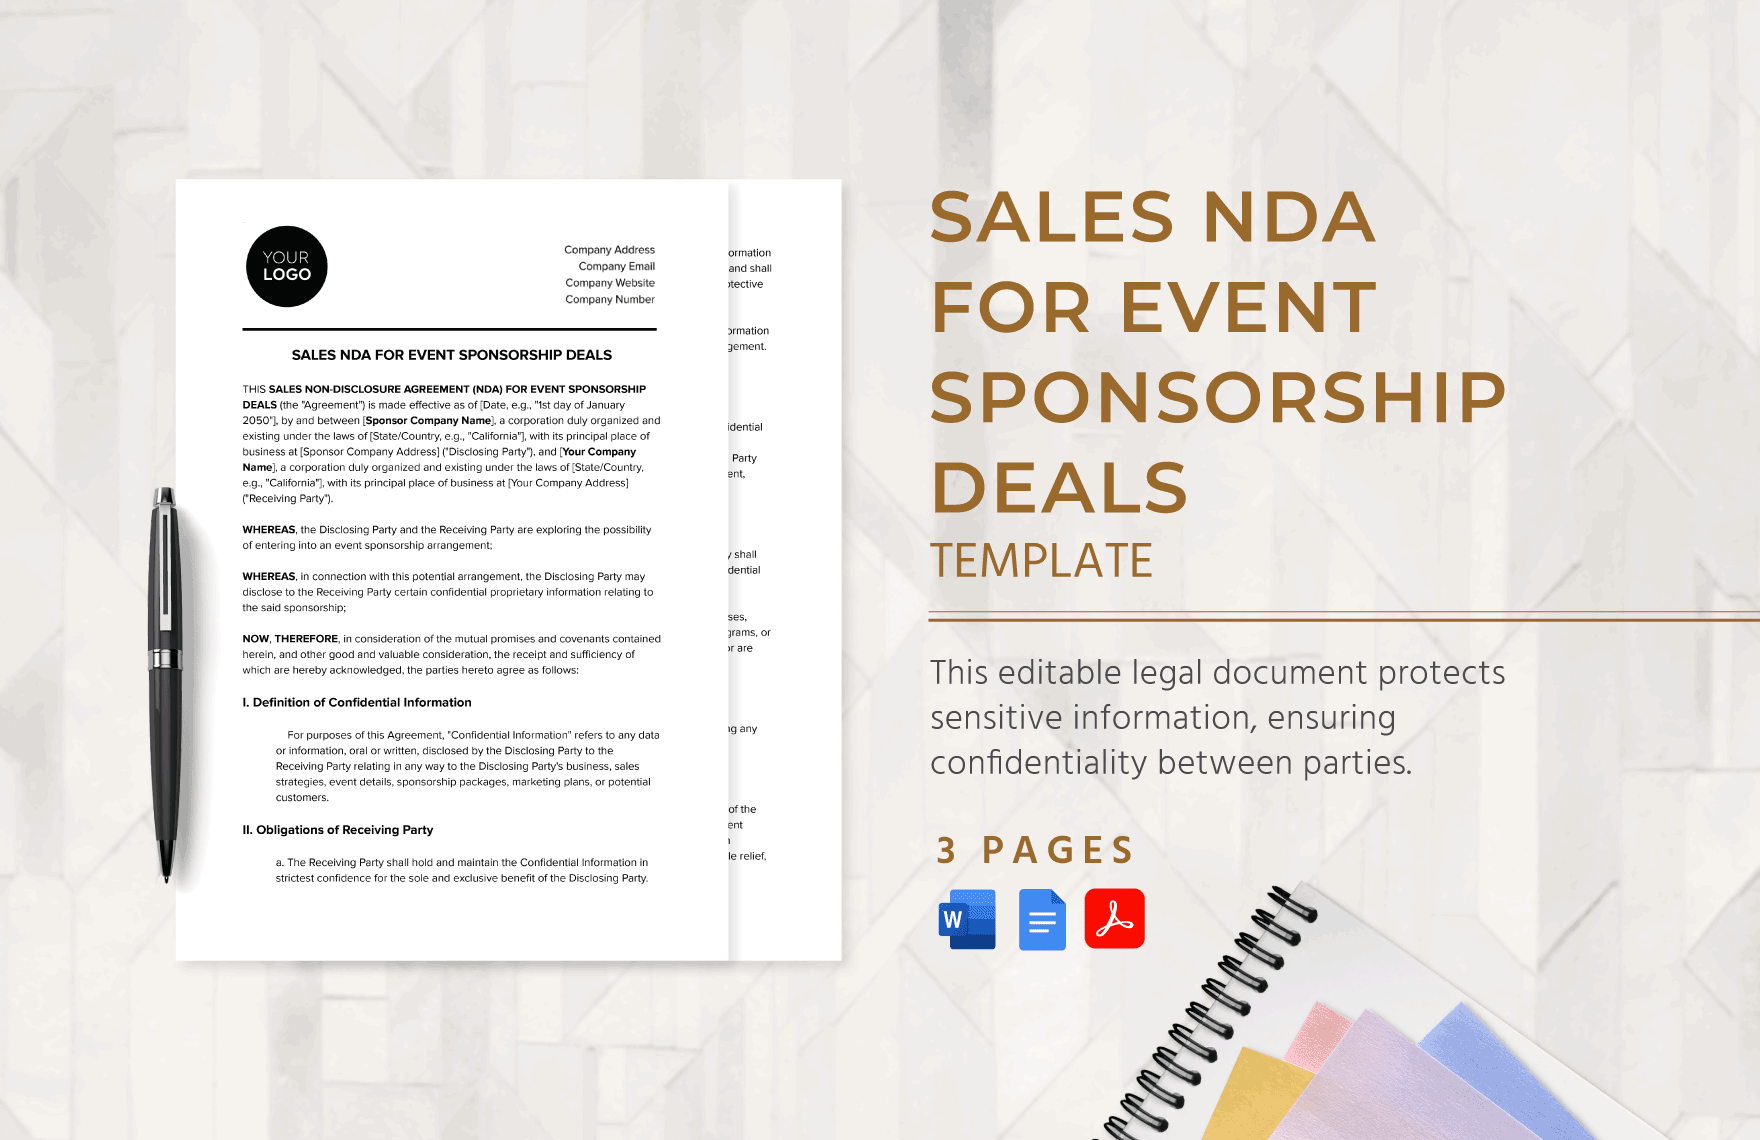 Sales NDA for Event Sponsorship Deals Template in Word, Google Docs, PDF